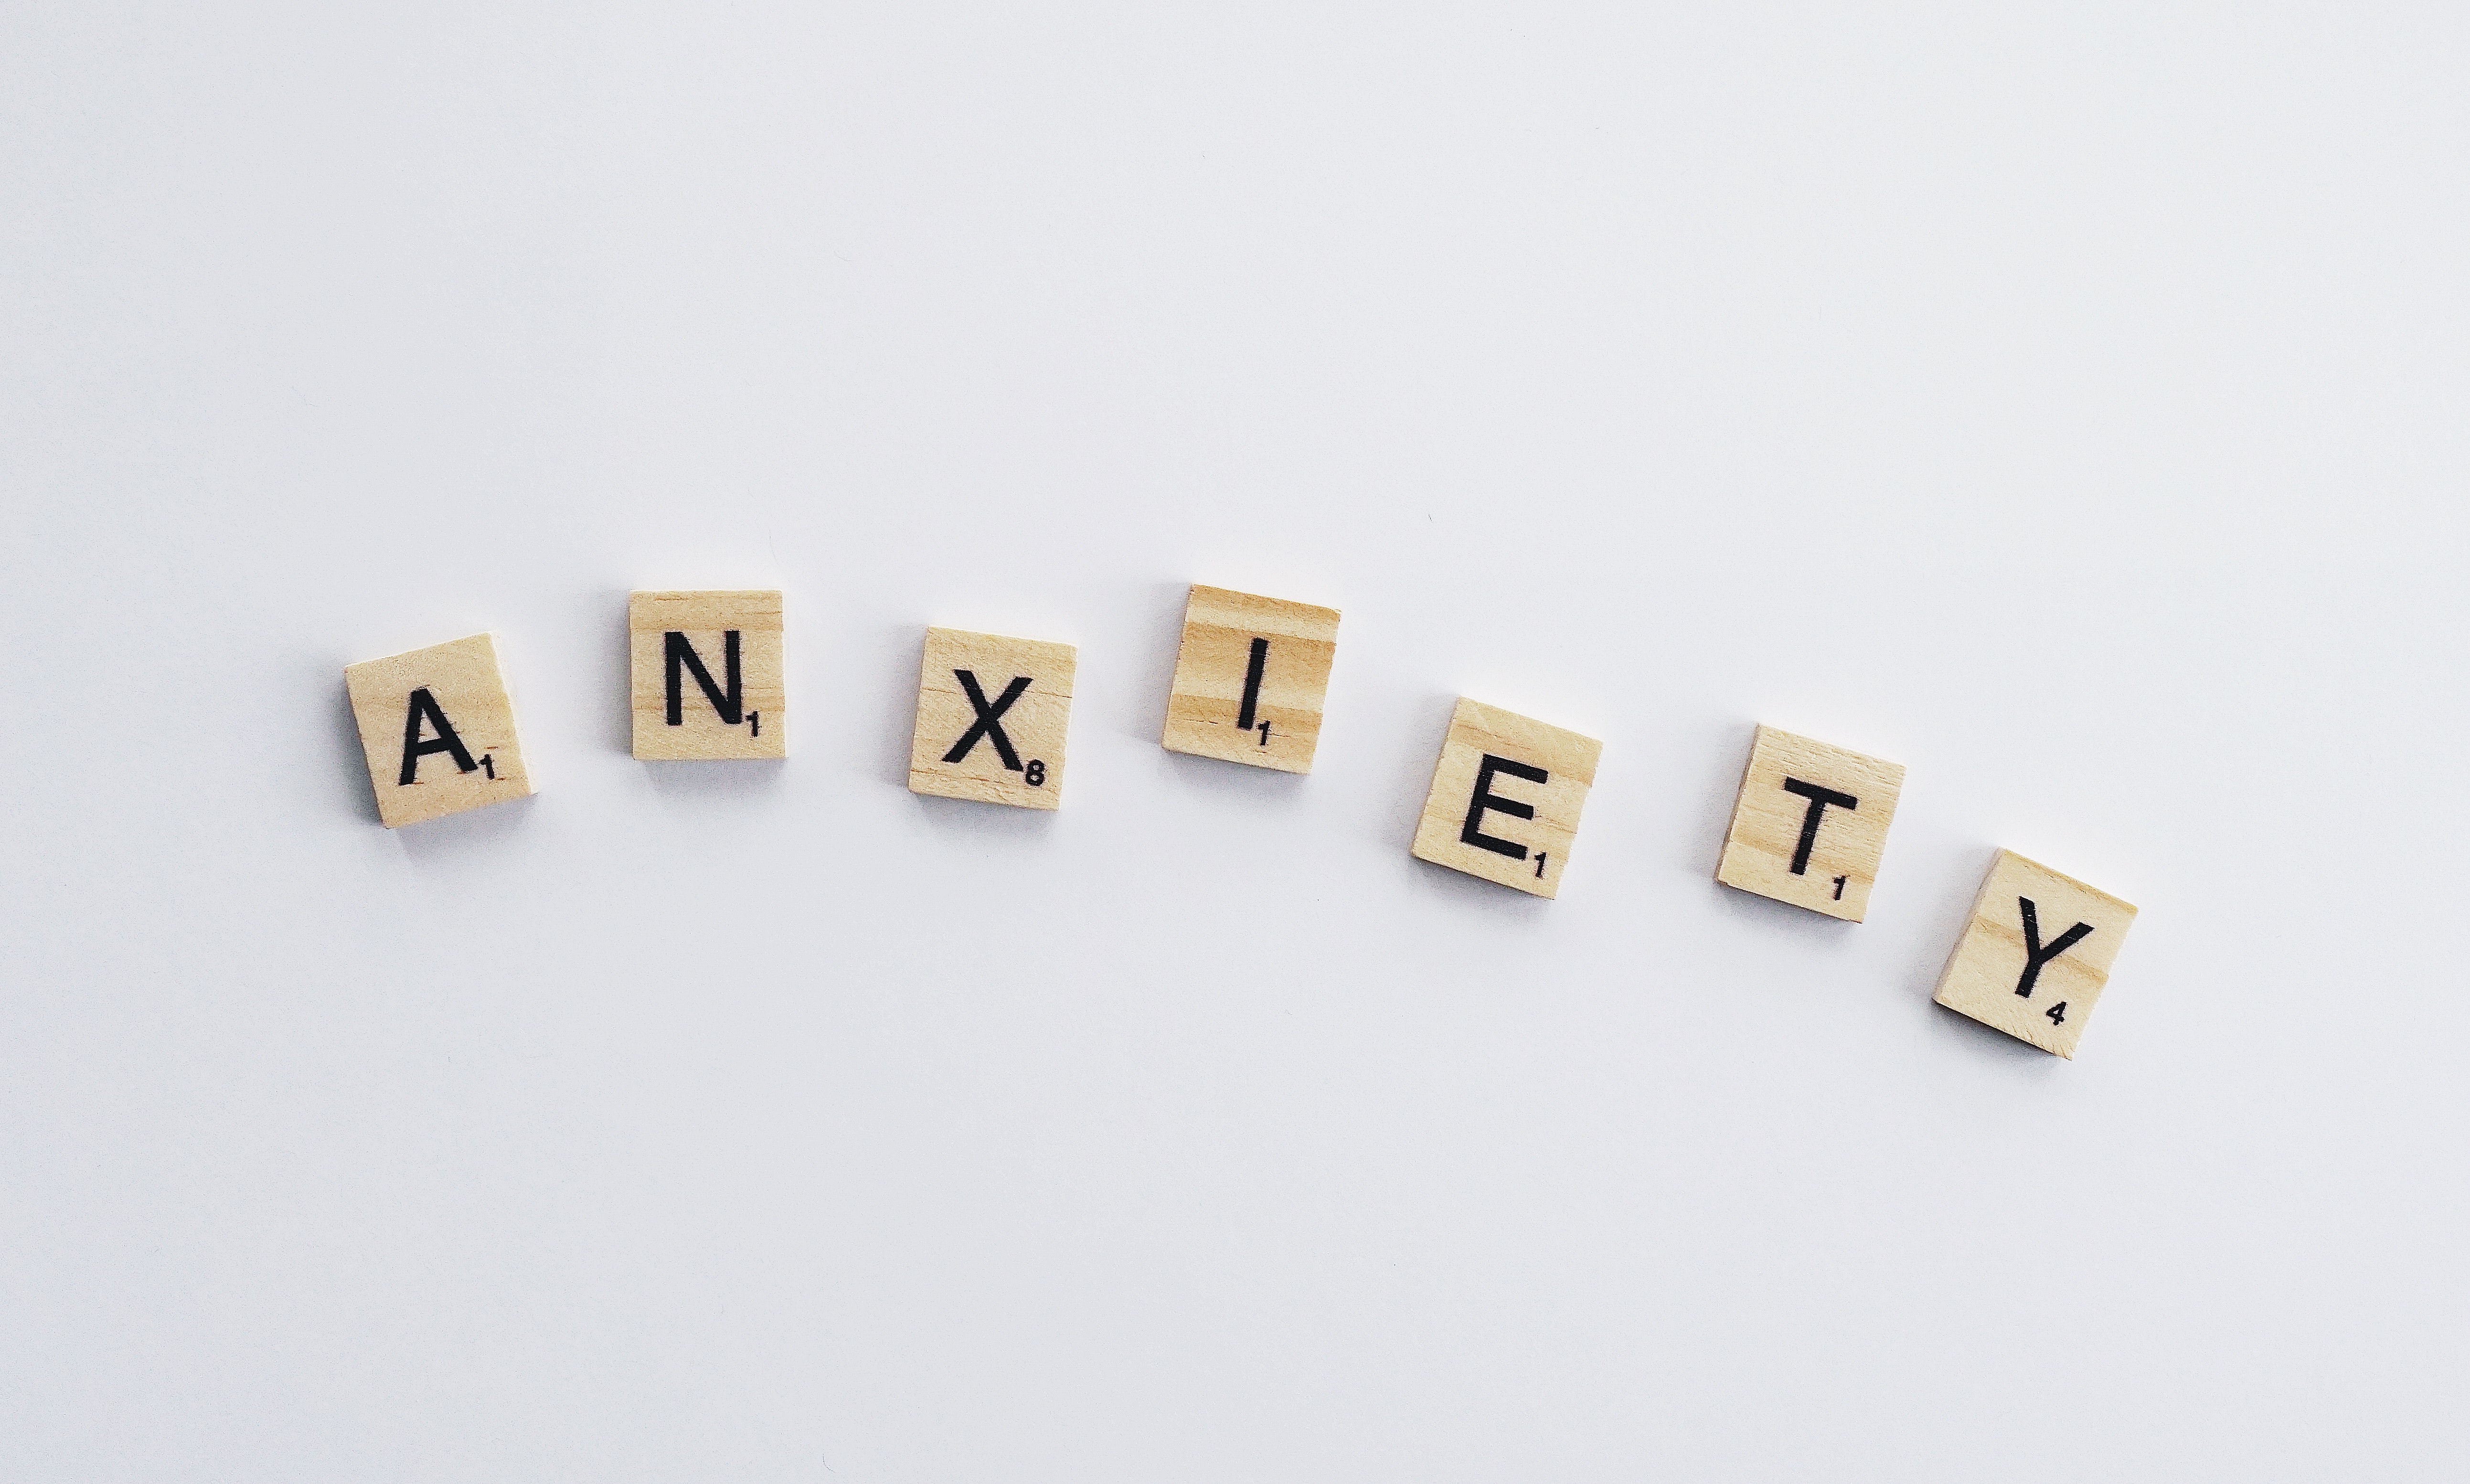 Anxiety is spelled out in letter tiles